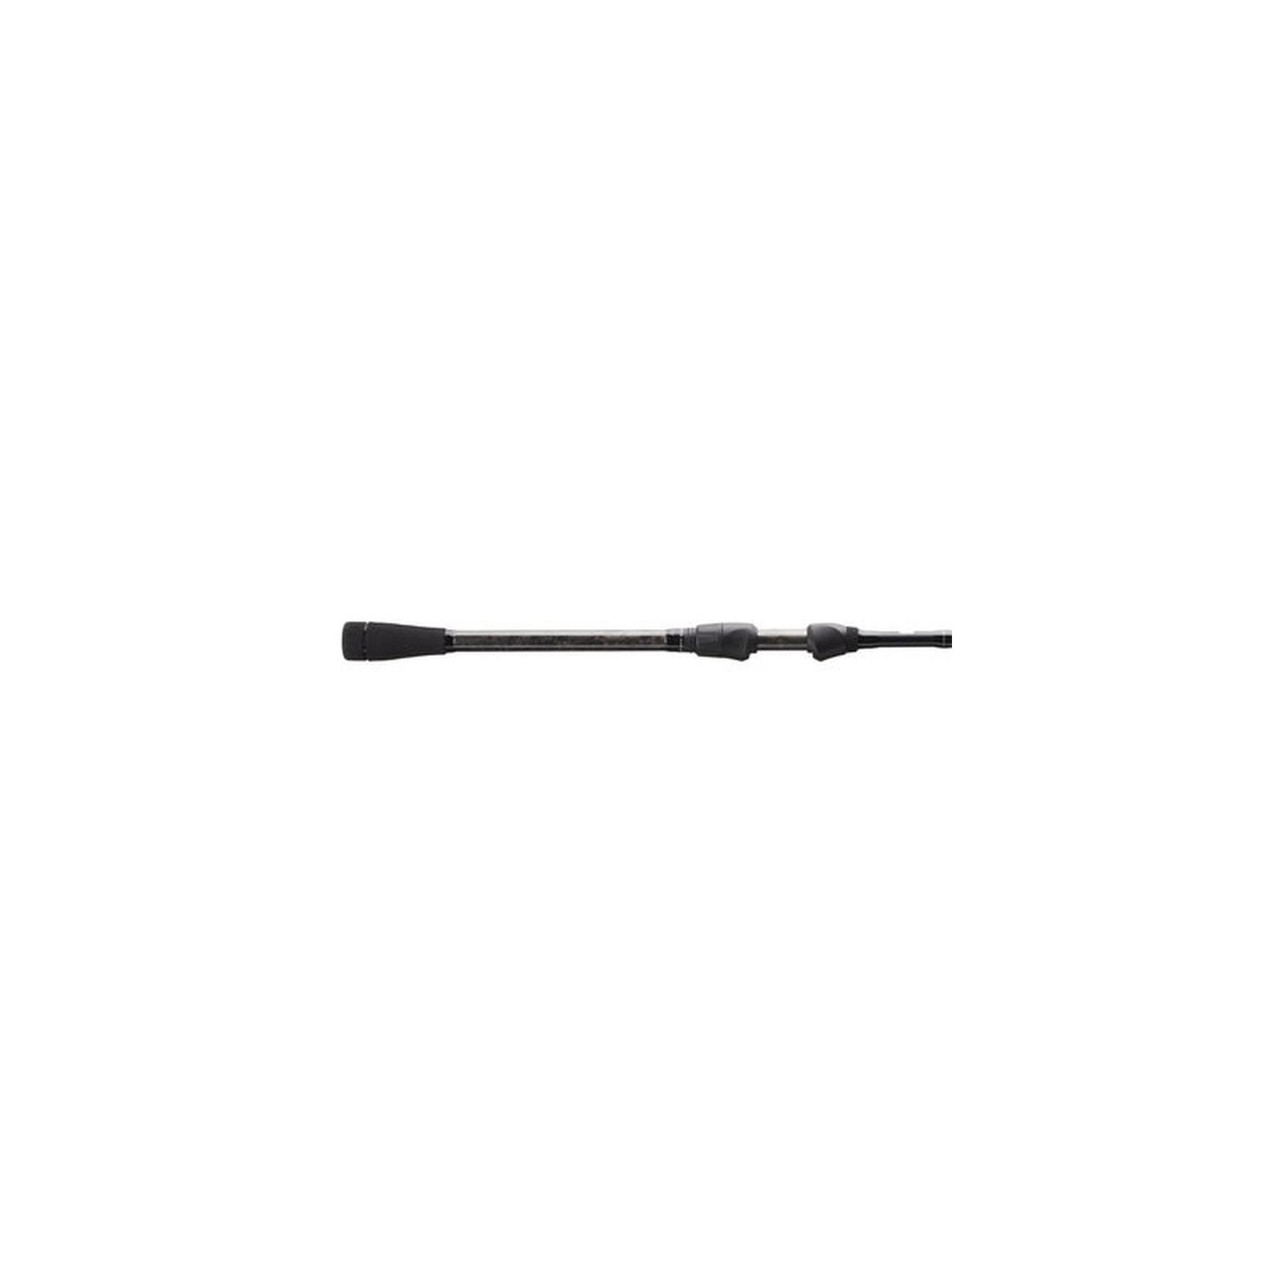 13 Fishing Fate Black Spinning Rods Black 7'1 M - Fin Feather Fur